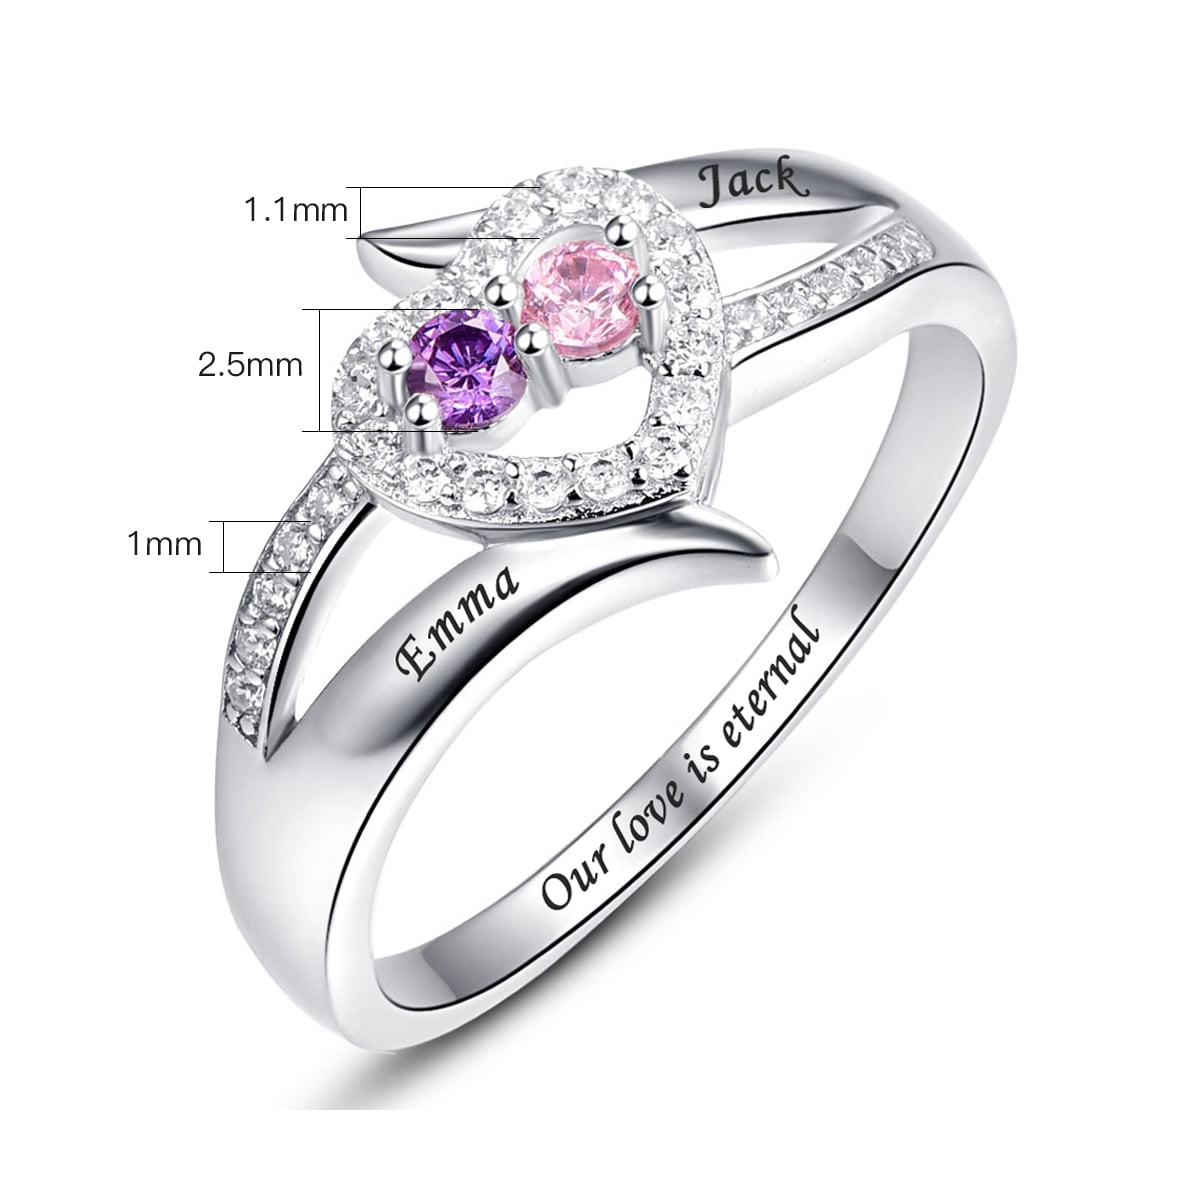 Mothers Ring with Birthstones in the UK - Crafted within 3 Days.